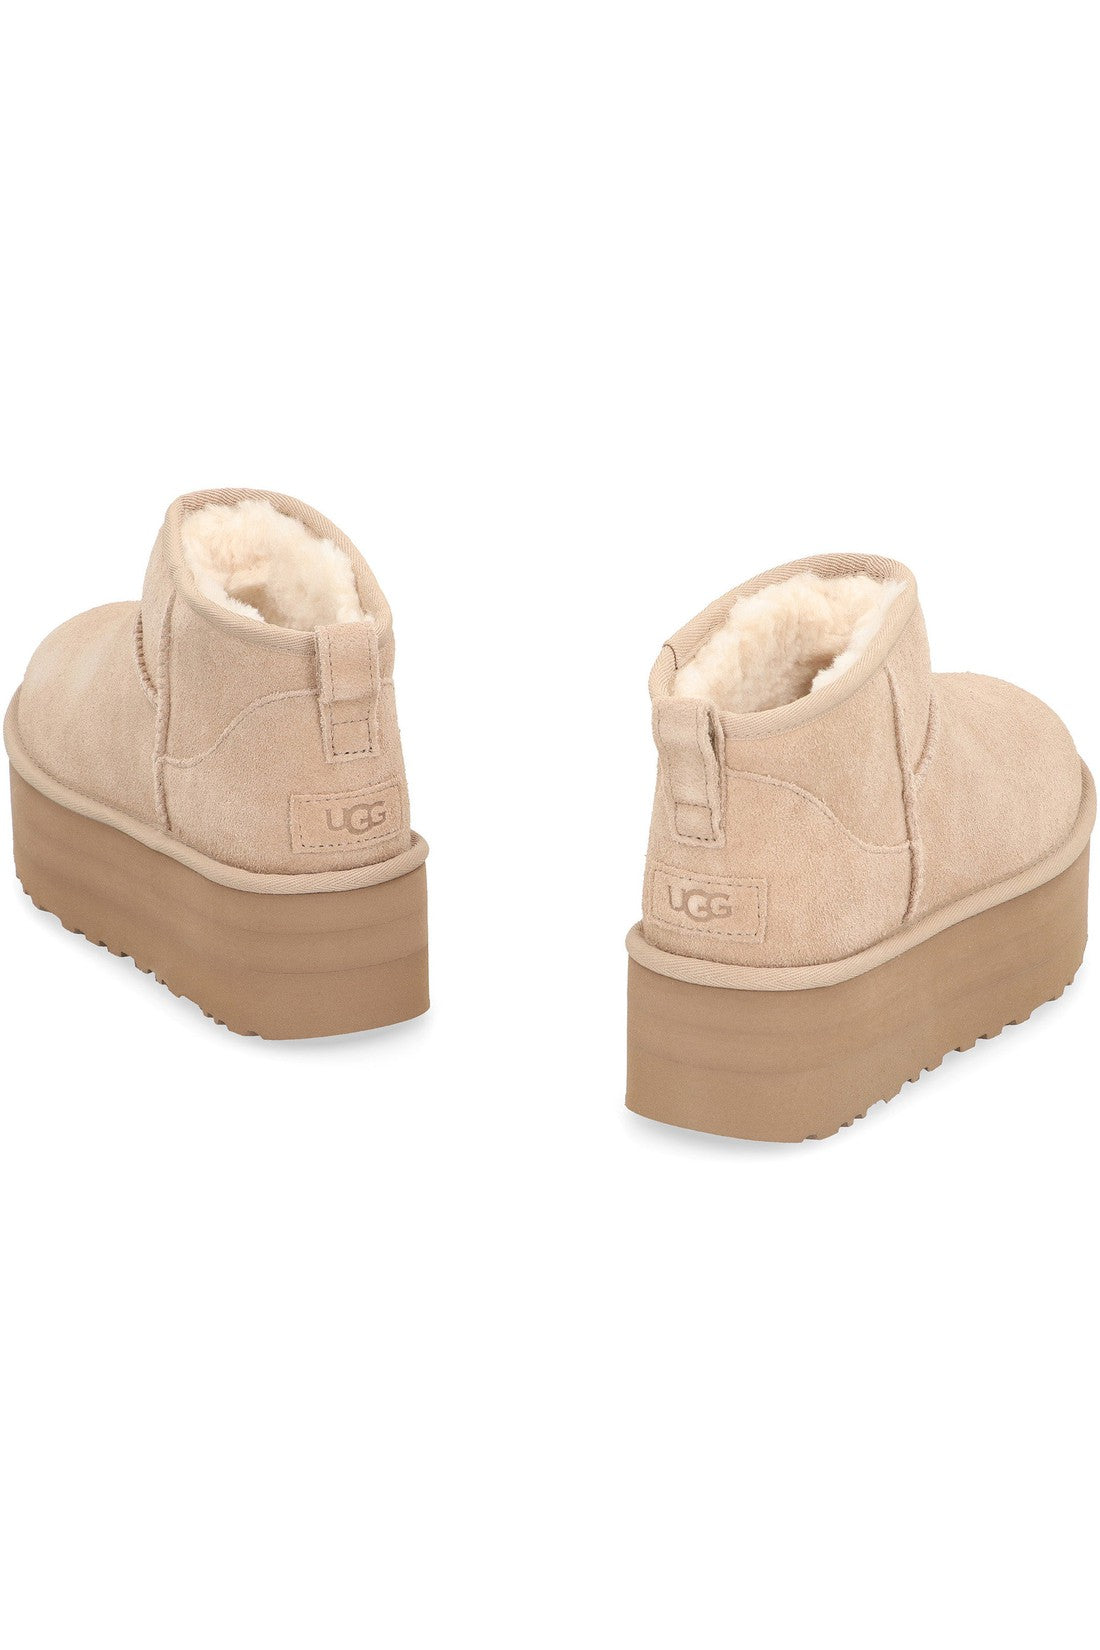 UGG-OUTLET-SALE-Classic Ultra Mini Boots-ARCHIVIST